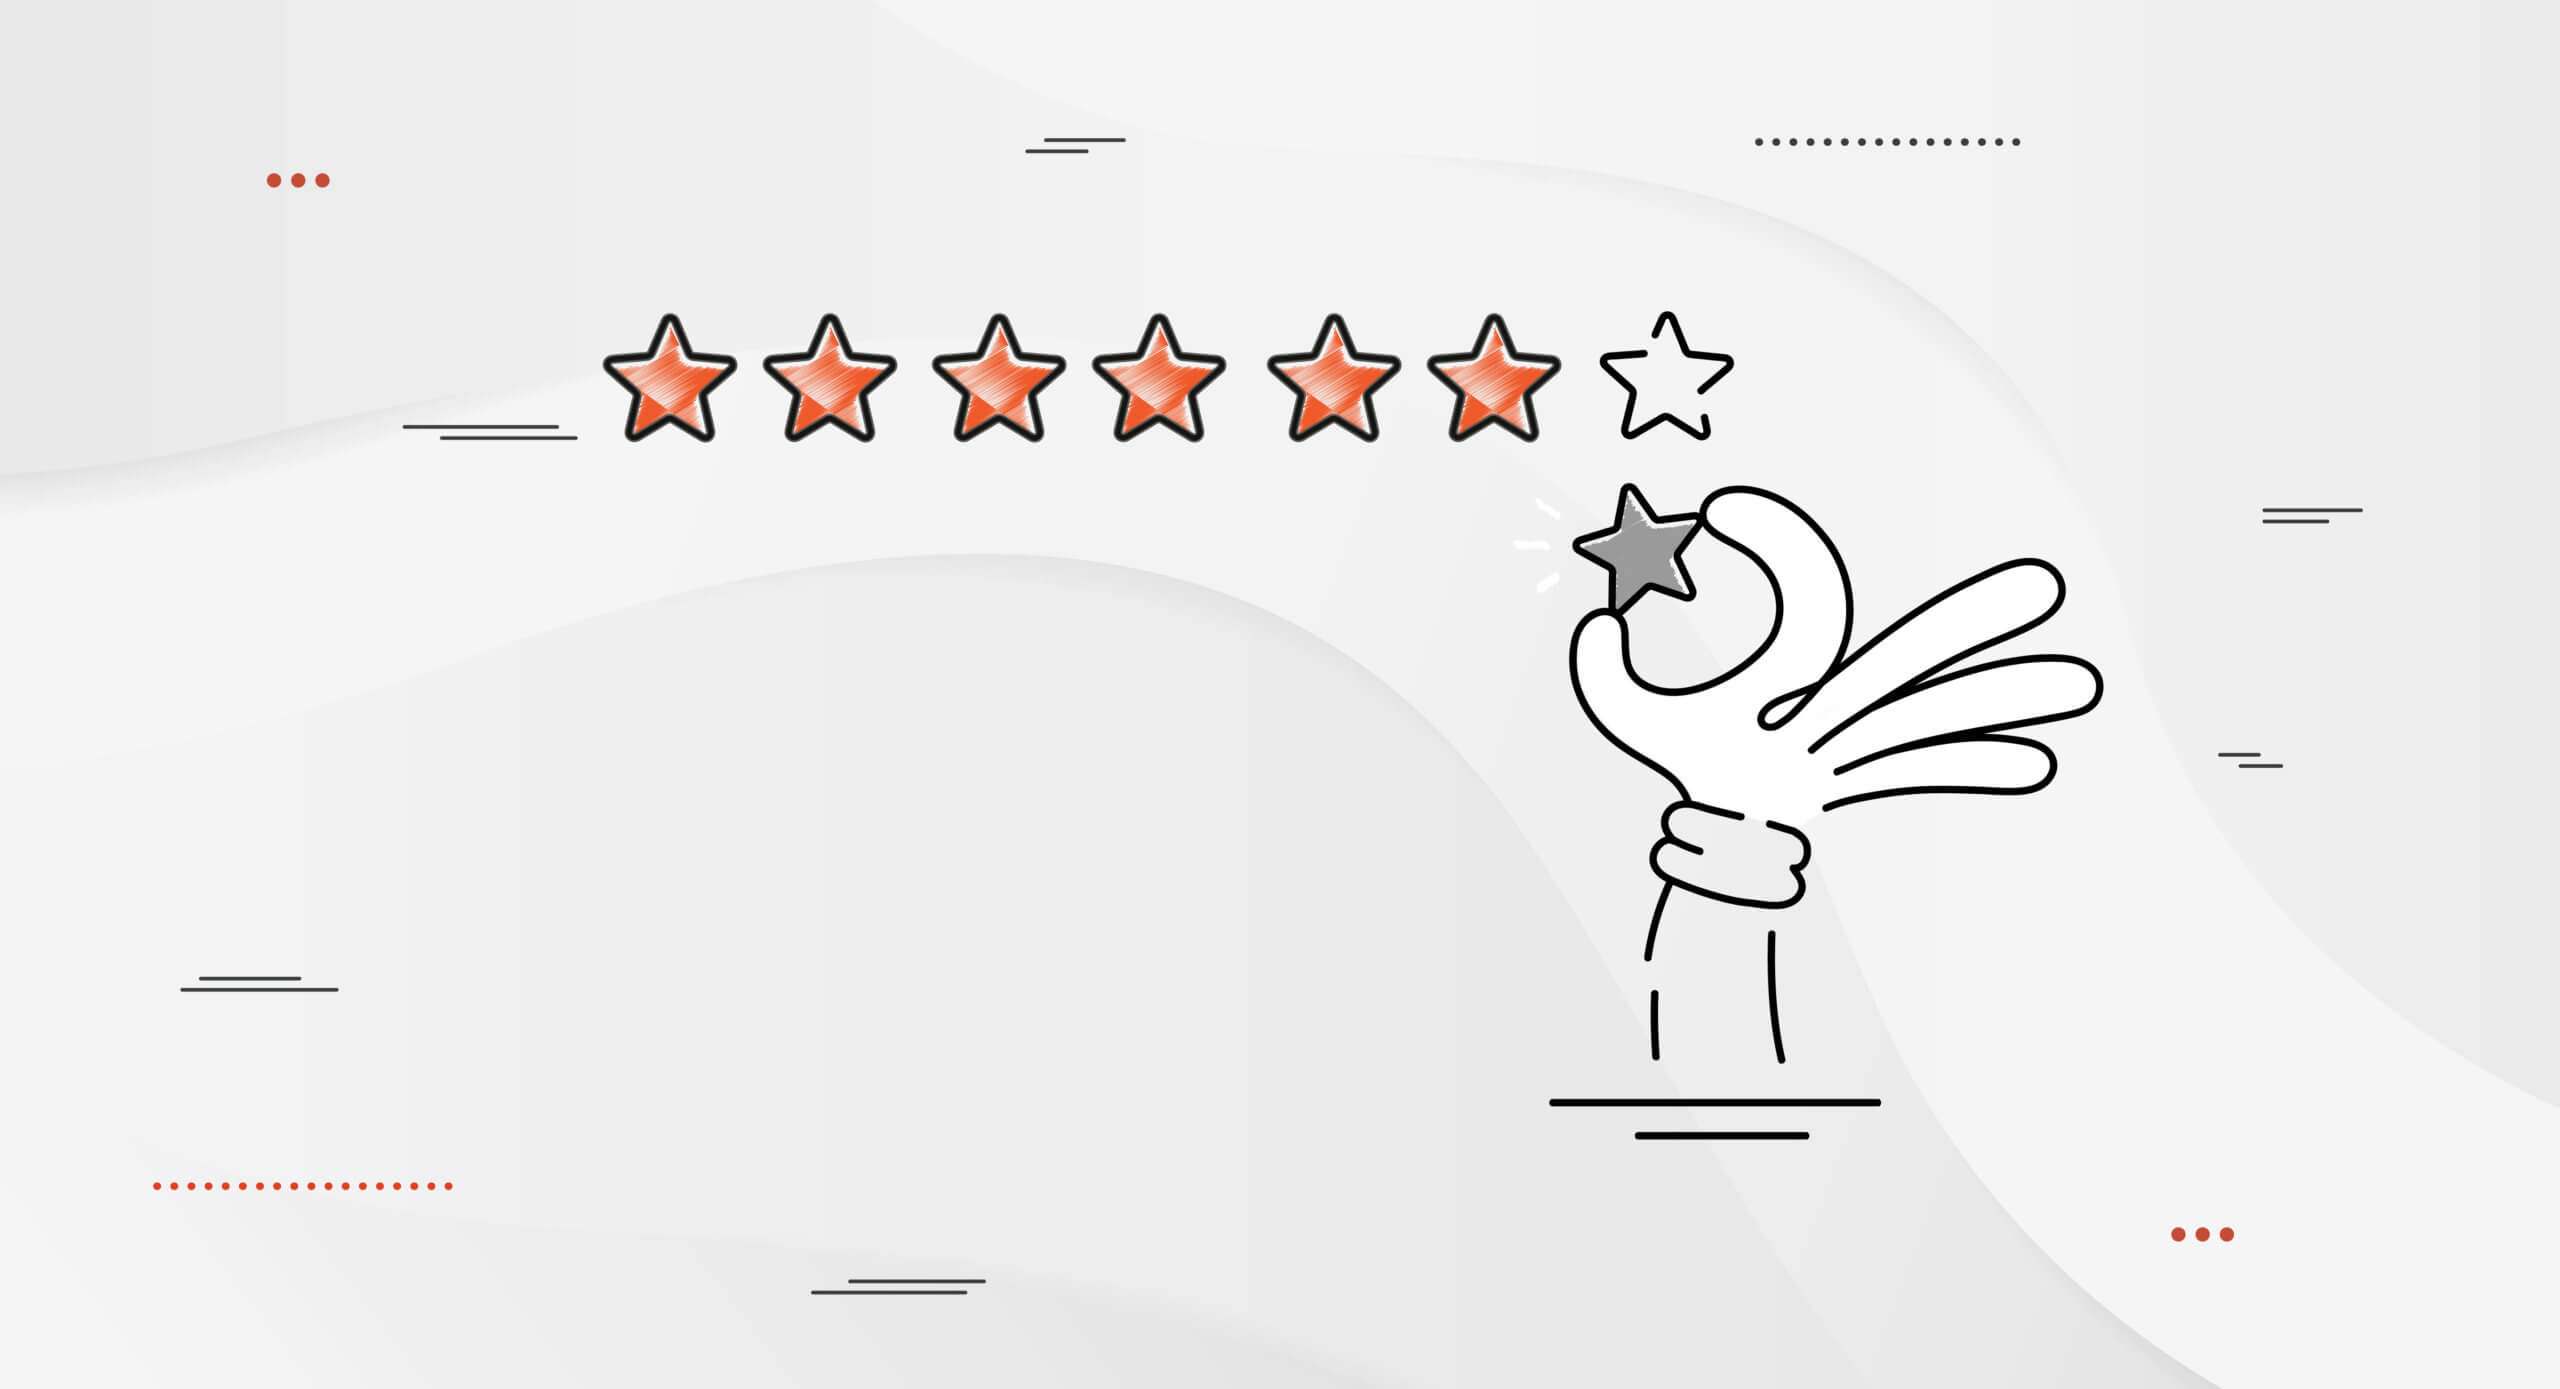 Everything you need to know about the Likert Scale